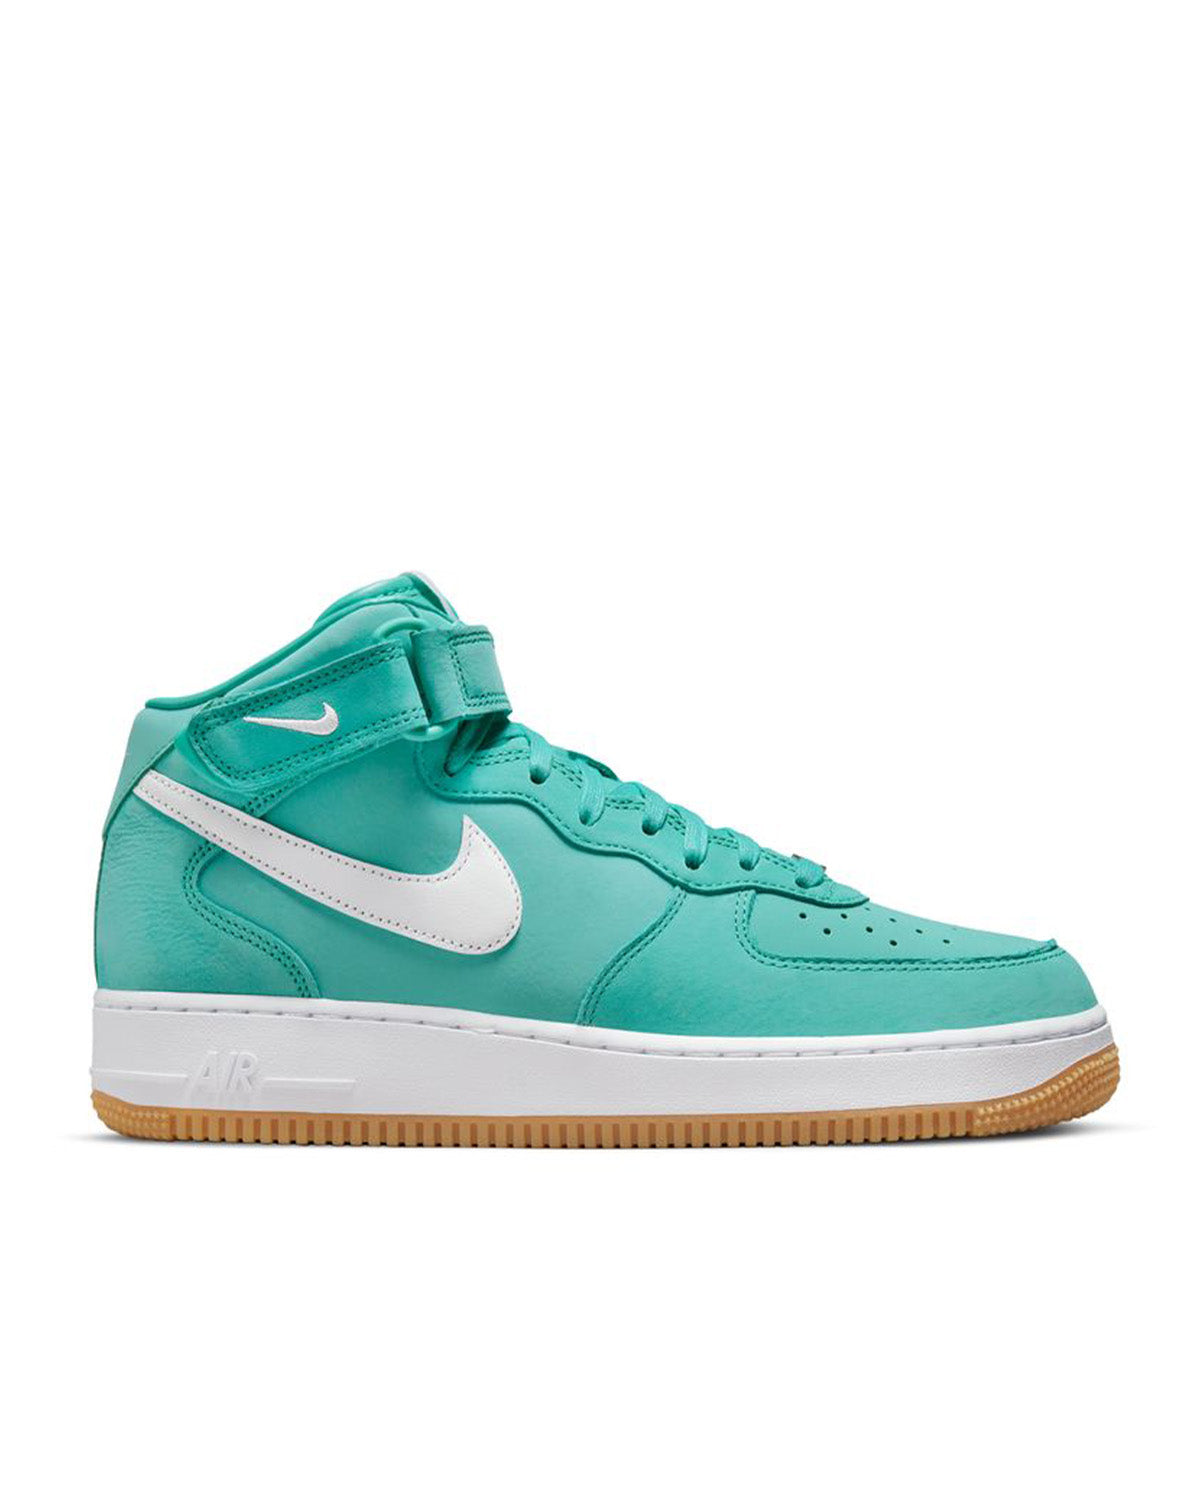 Air Force 1 Mid Premium Washed Teal/White/Gum